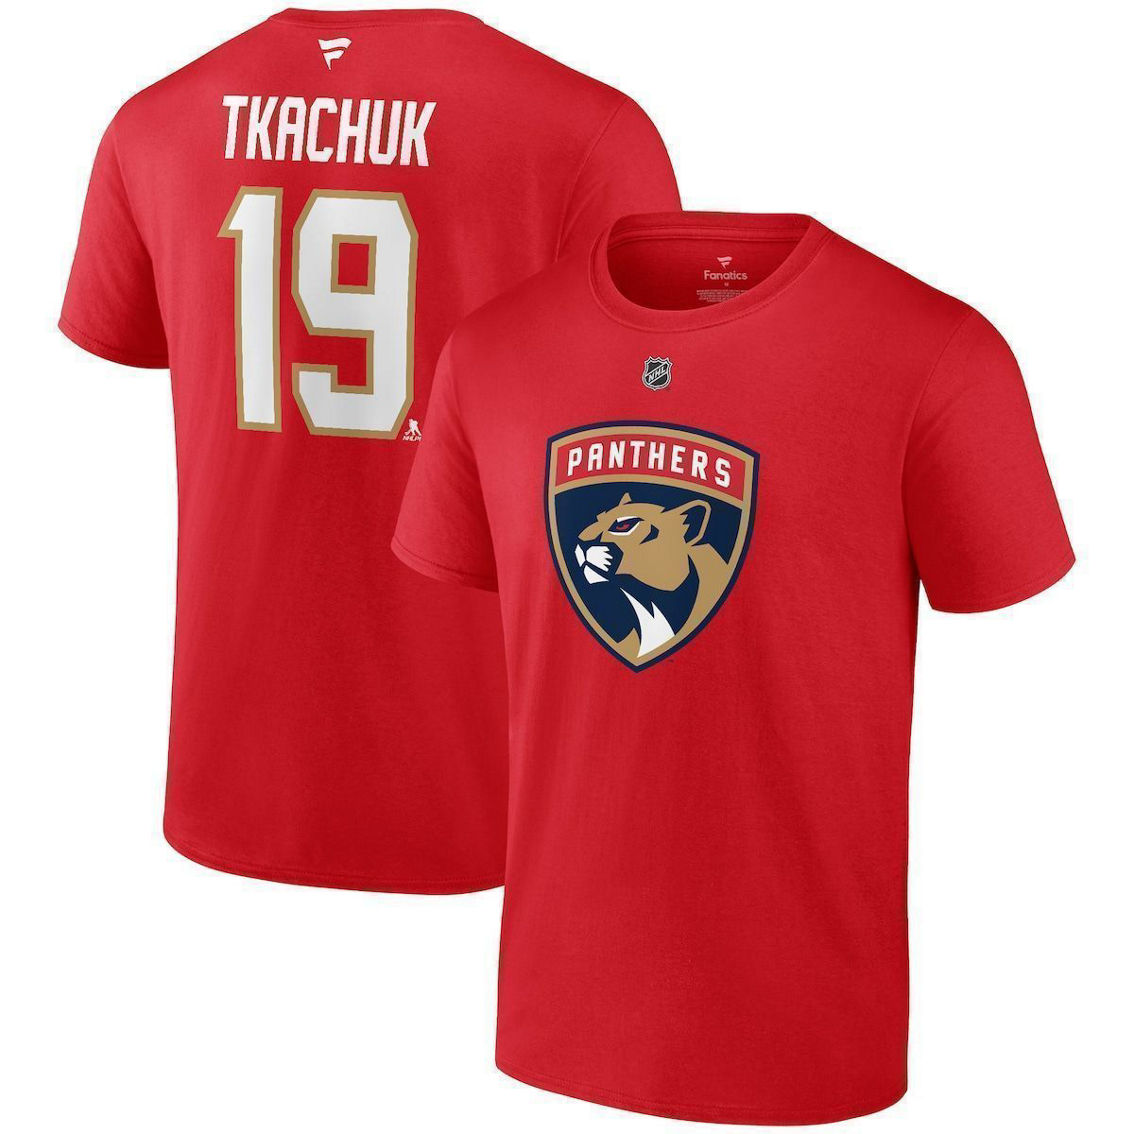 Fanatics Branded Men's Matthew Tkachuk Red Florida Panthers Authentic Stack Name & Number T-Shirt - Image 2 of 4